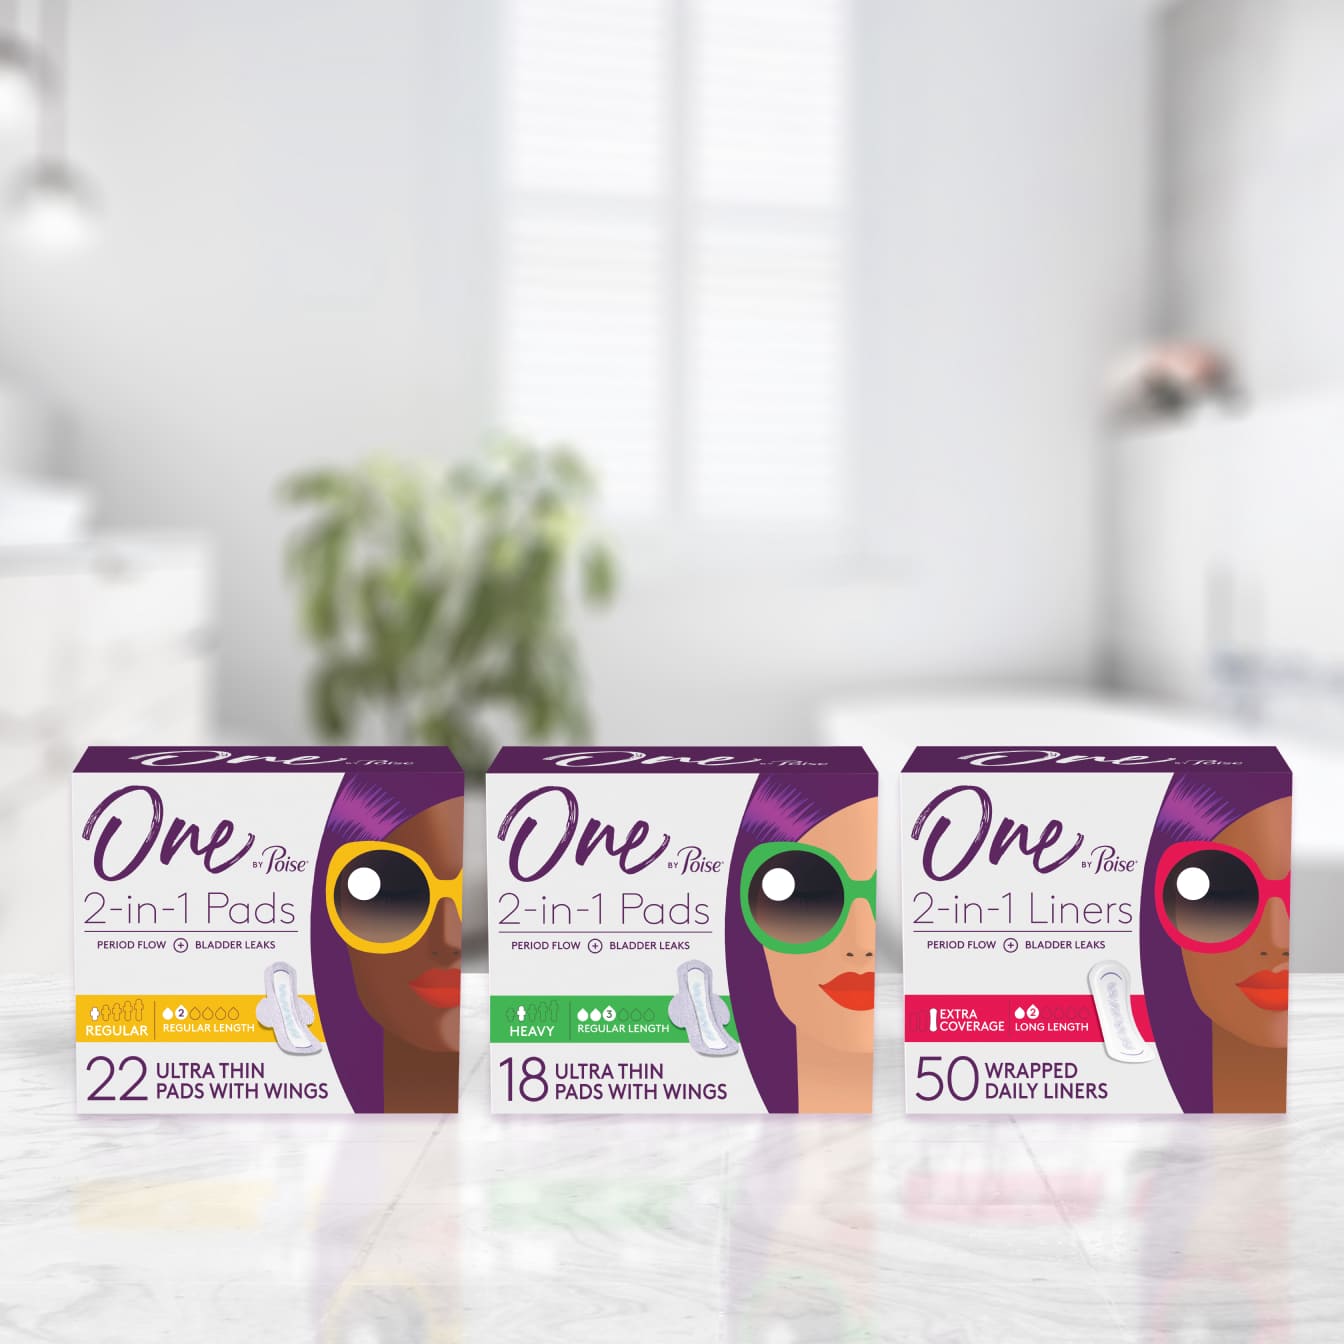 One by Poise® for women